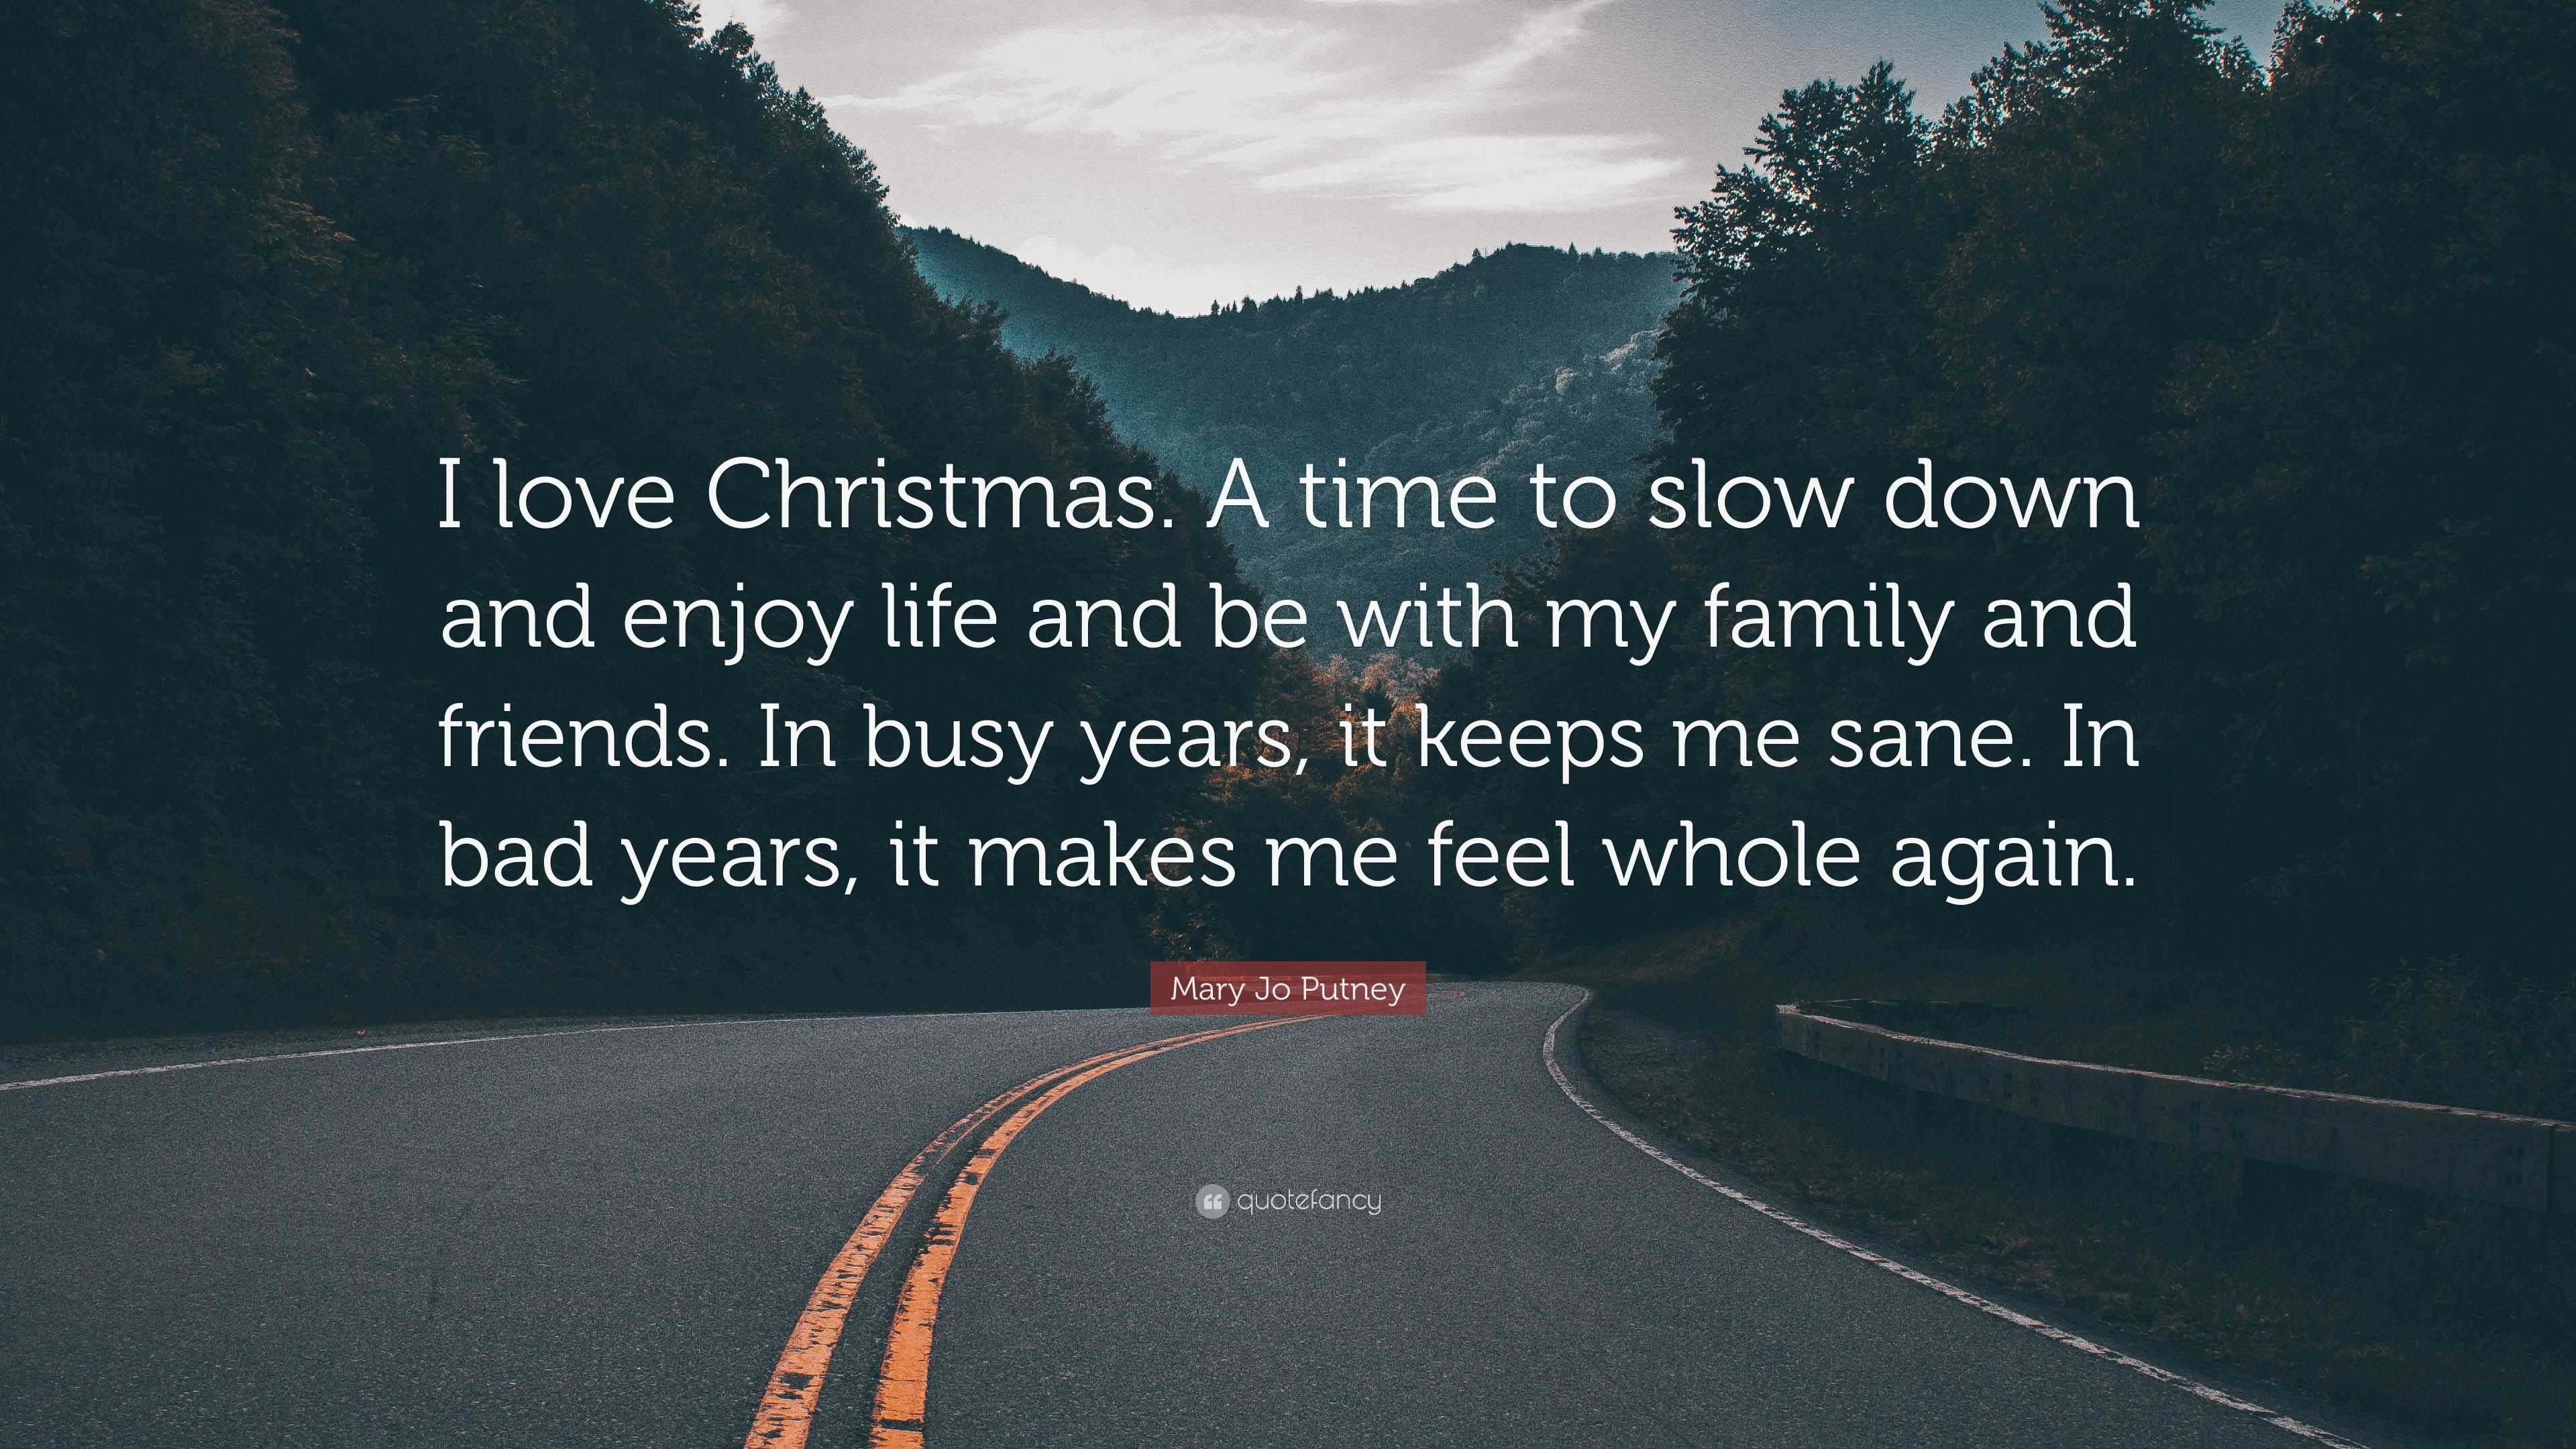 quotes about enjoying life with friends mary jo putney quote u201ci love christmas a time to slow down and